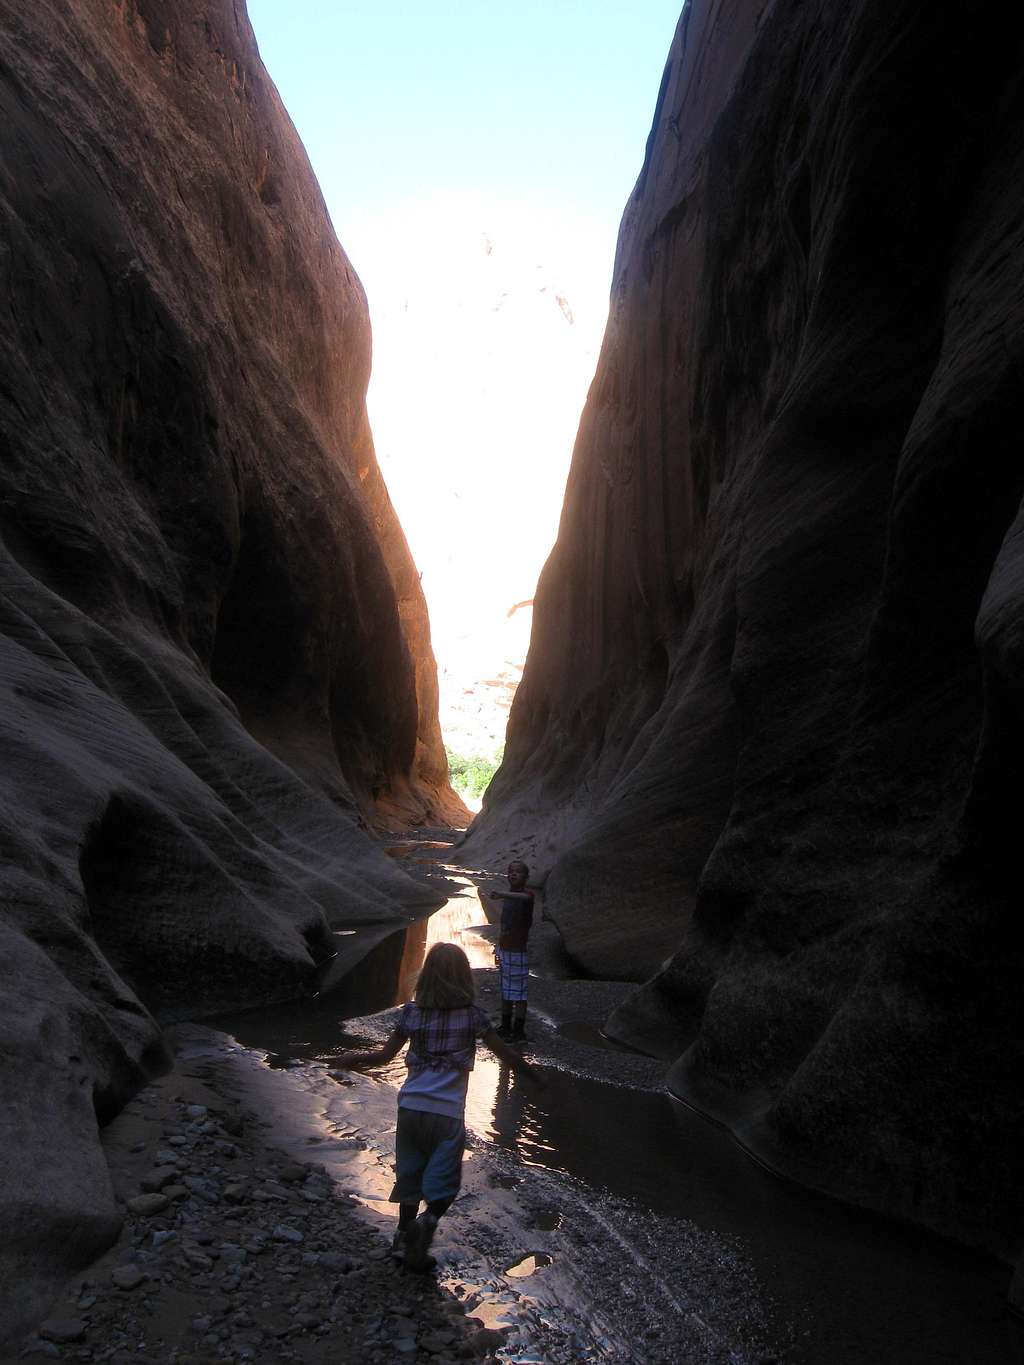 Deep in the Narrows